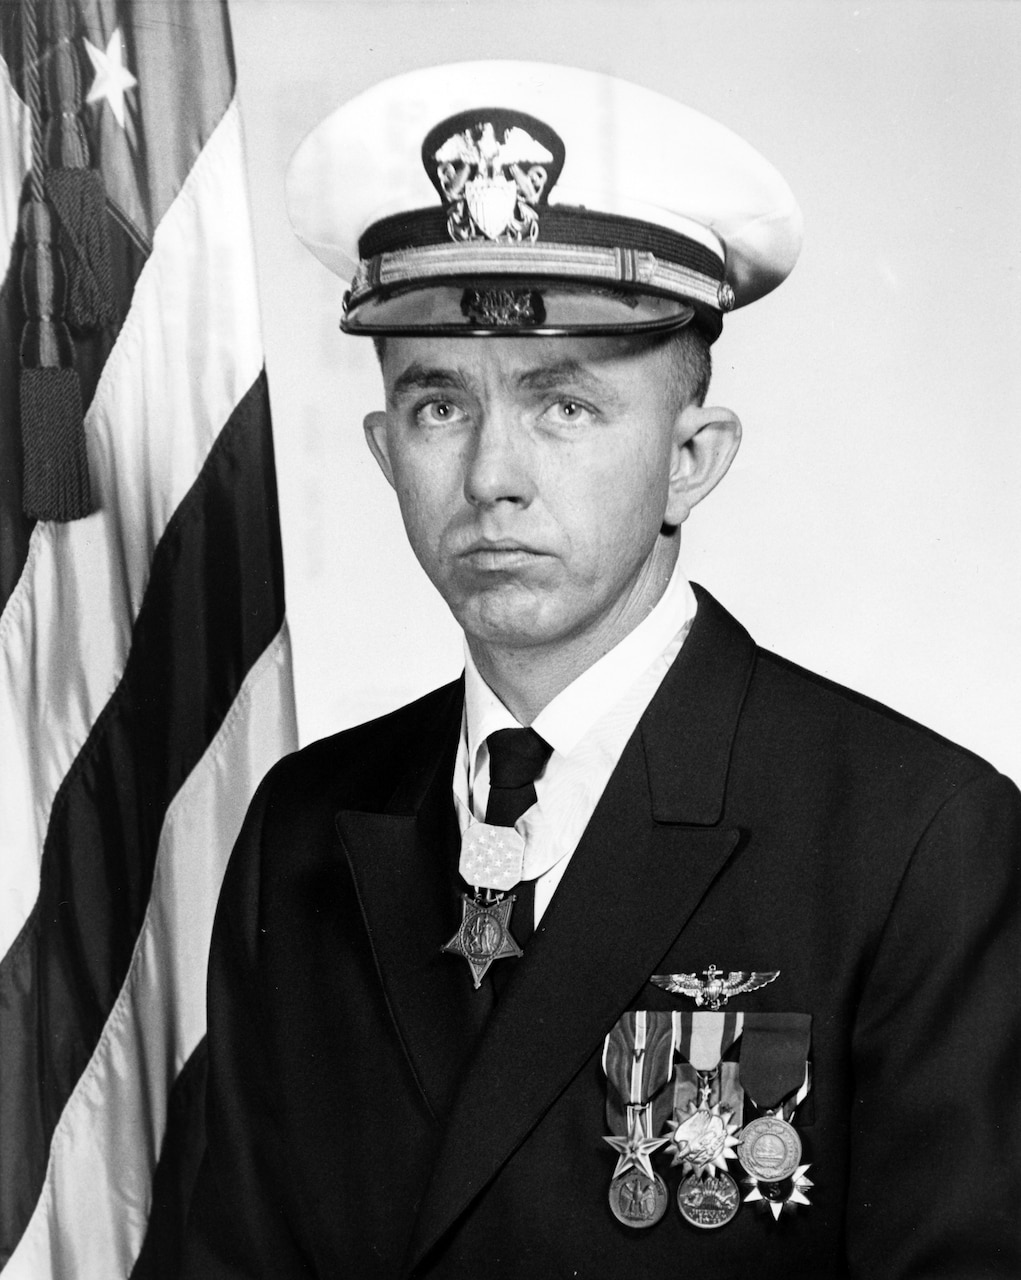 A man in a military dress uniform and cap wears a medal around his neck.